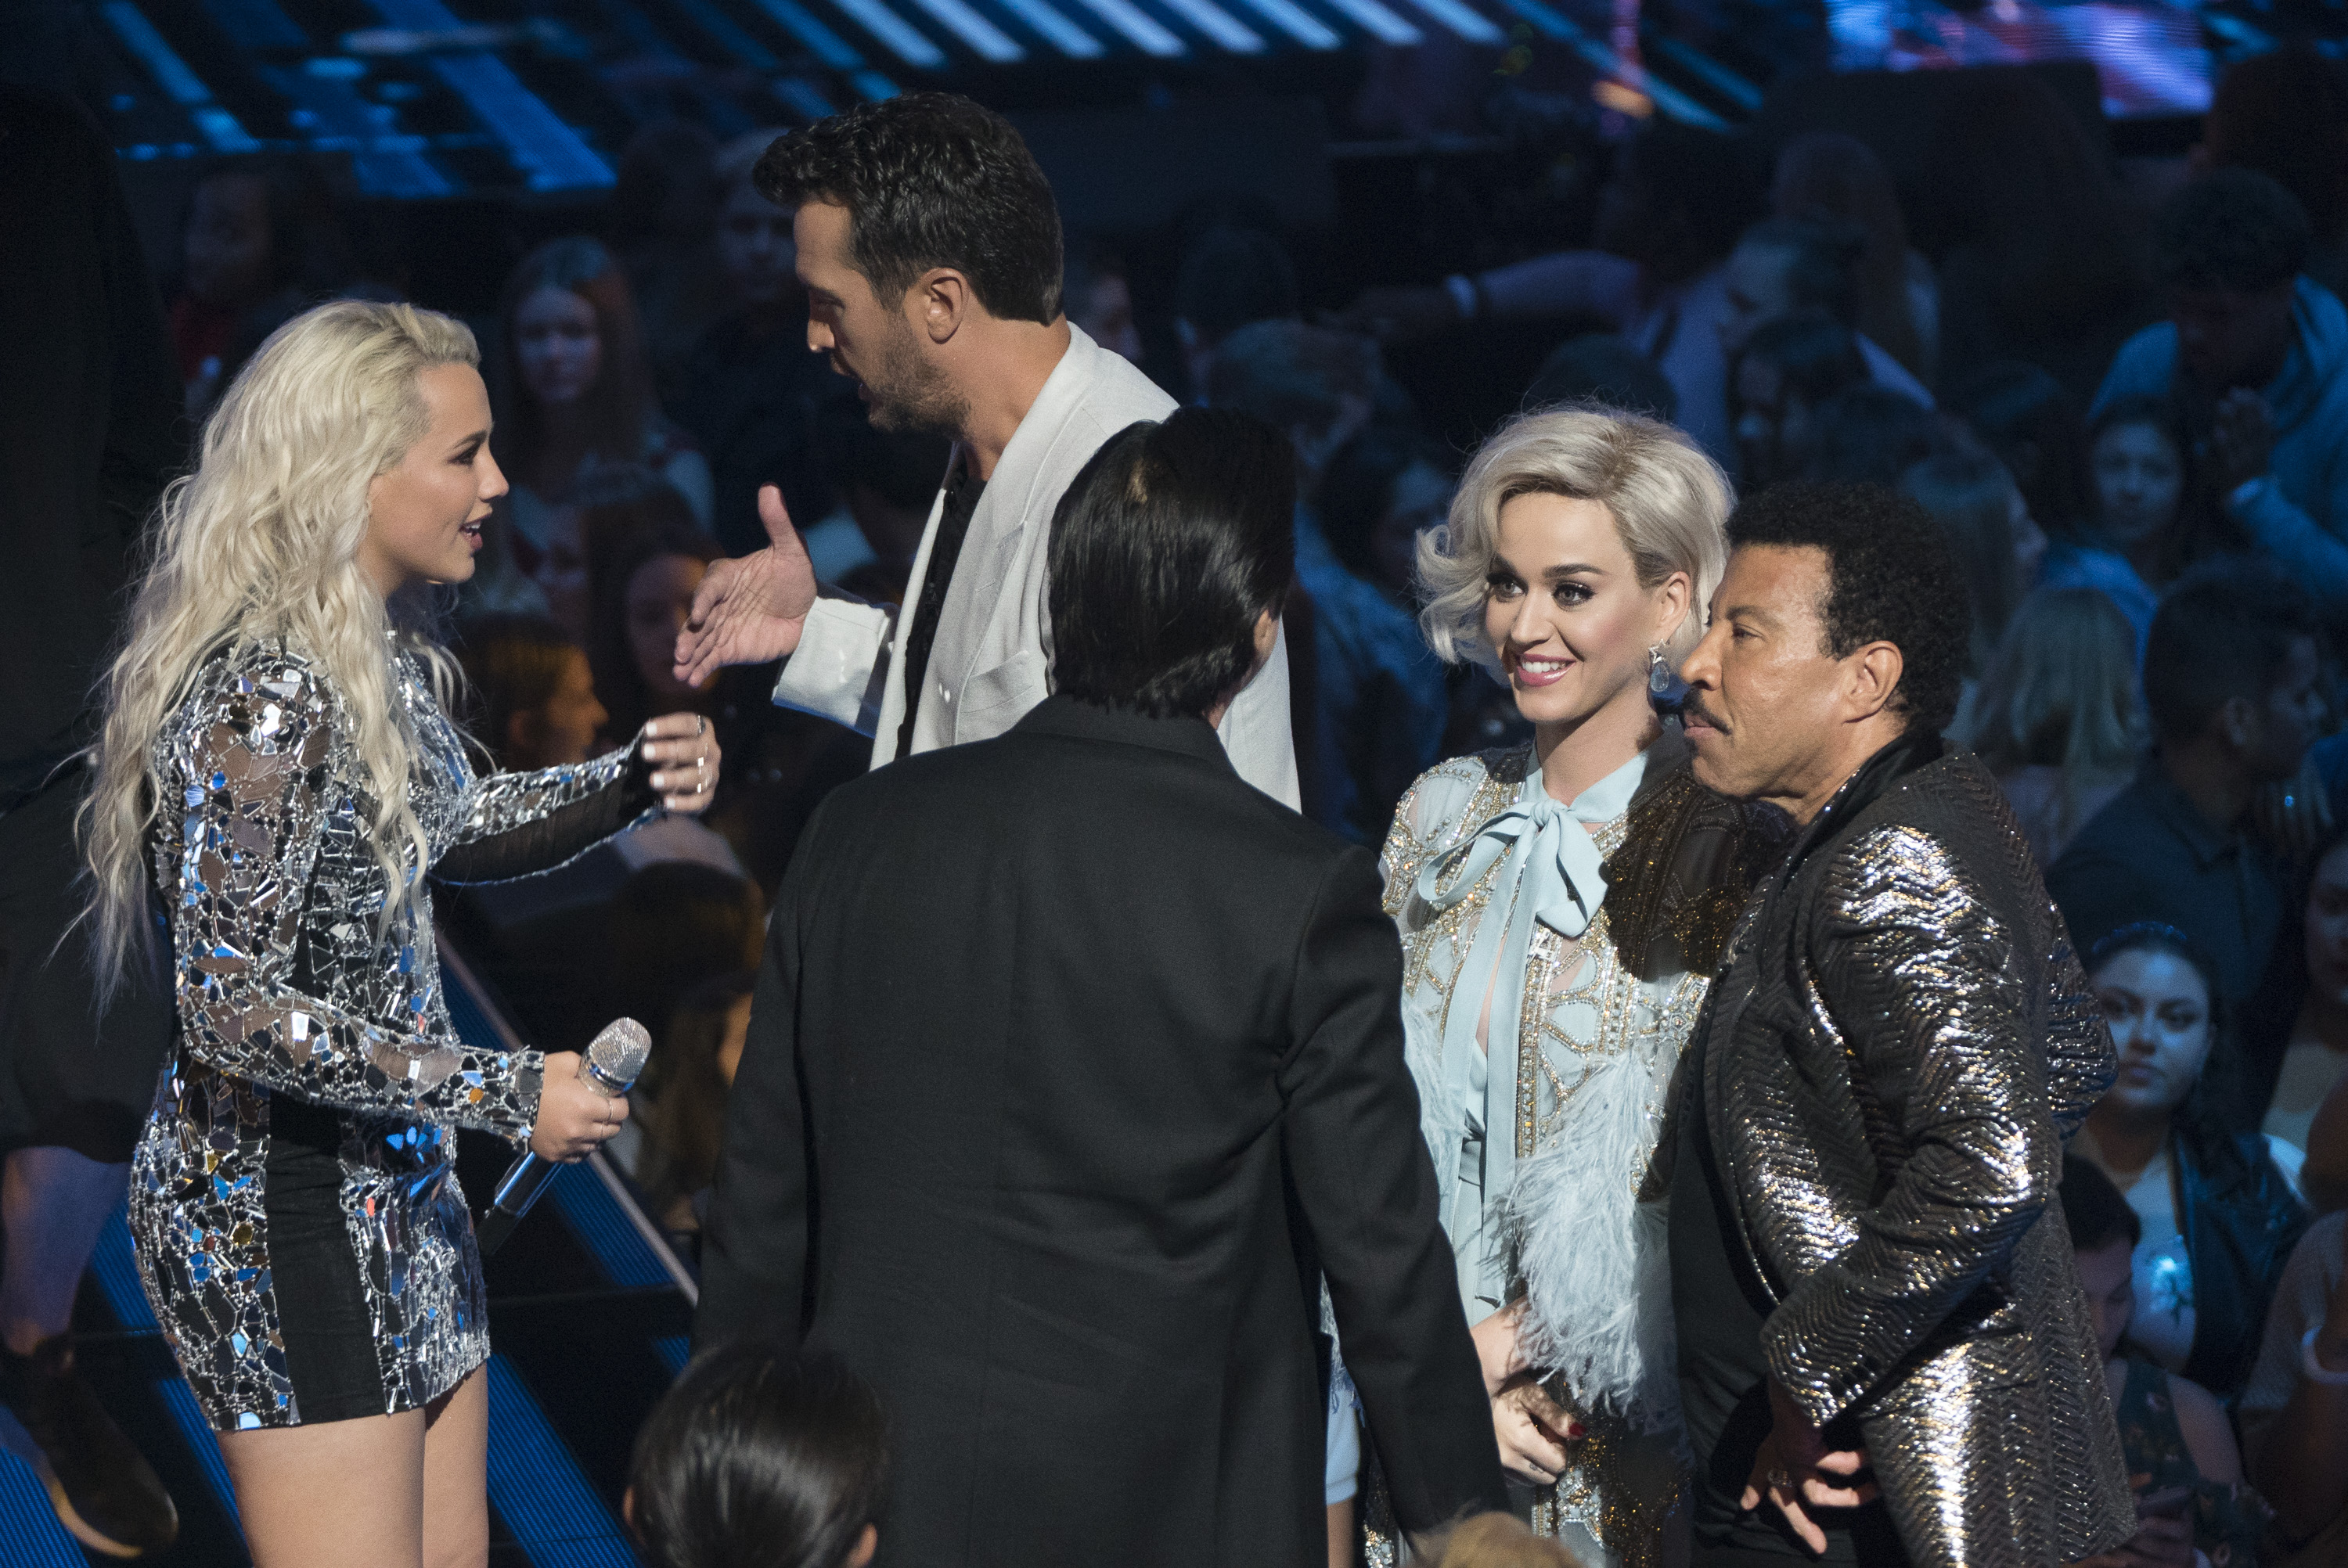 Katy Perry, Lionel Richie, Steve Perry, Gabby Barrett, and Luke Bryan on American Idol which aired on ABC on May 20, 2018.
Photo credit: American Idol
